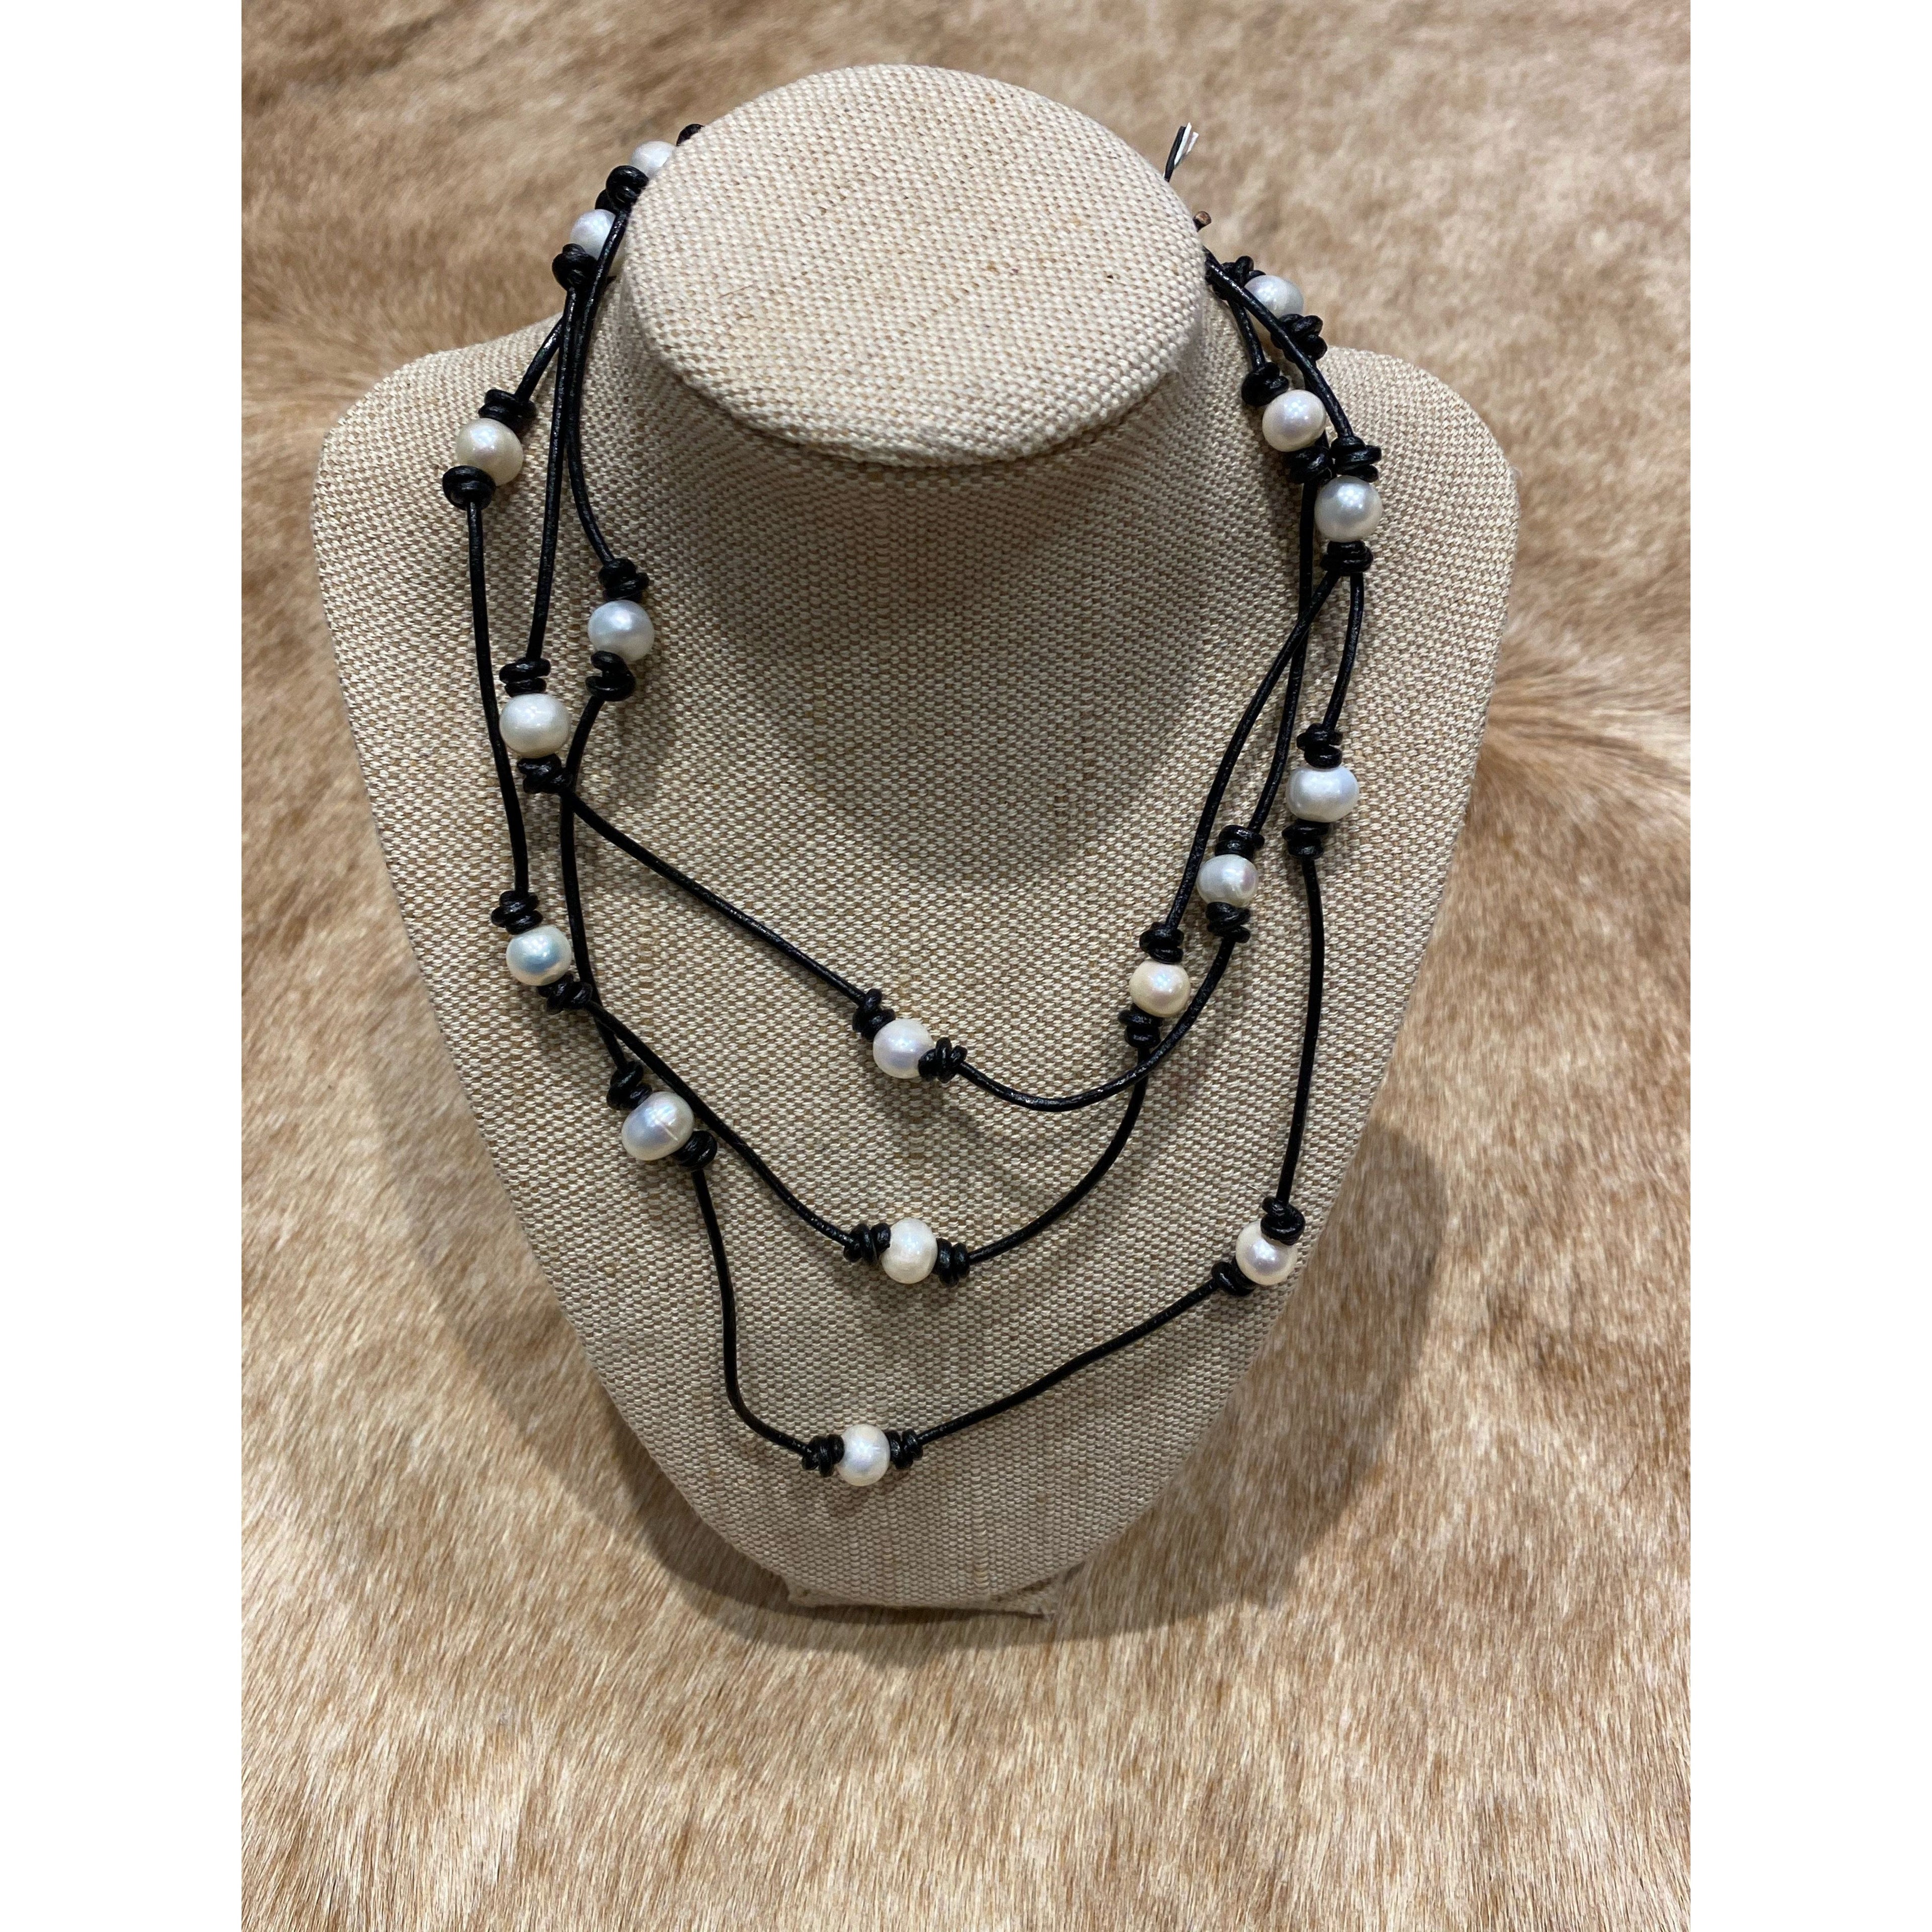 Leather and Pearl Necklace / wrap bracelet 55” 